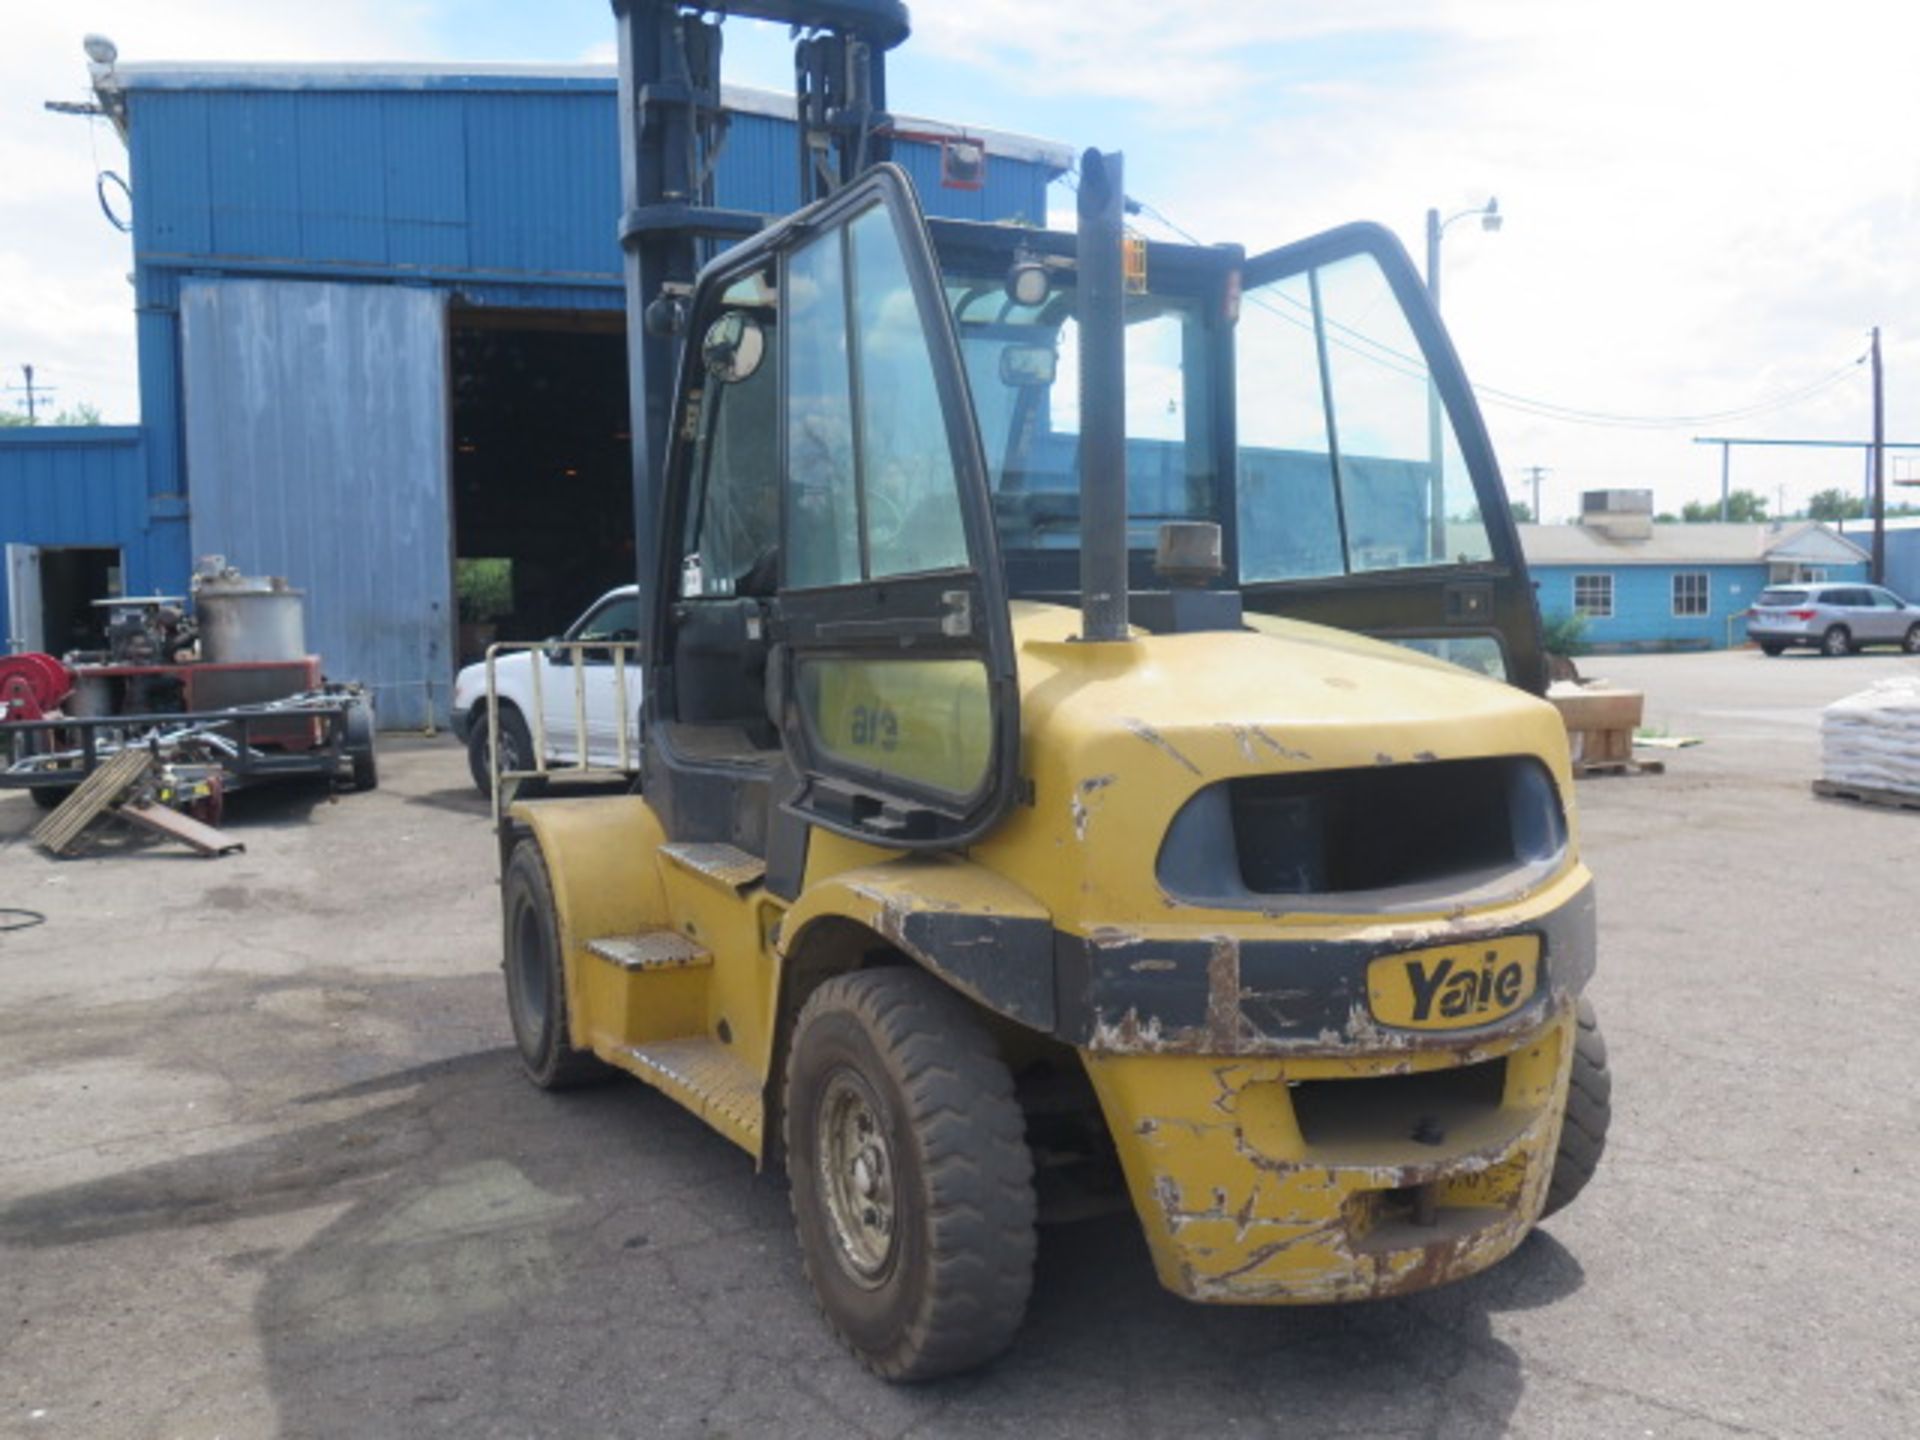 Yale GDP155VXNCHV148 15,400 Lb Cap Diesel Forklift s/n C878V01753F w/ 2-Stage Tall Mast, 212” Lift - Image 3 of 7